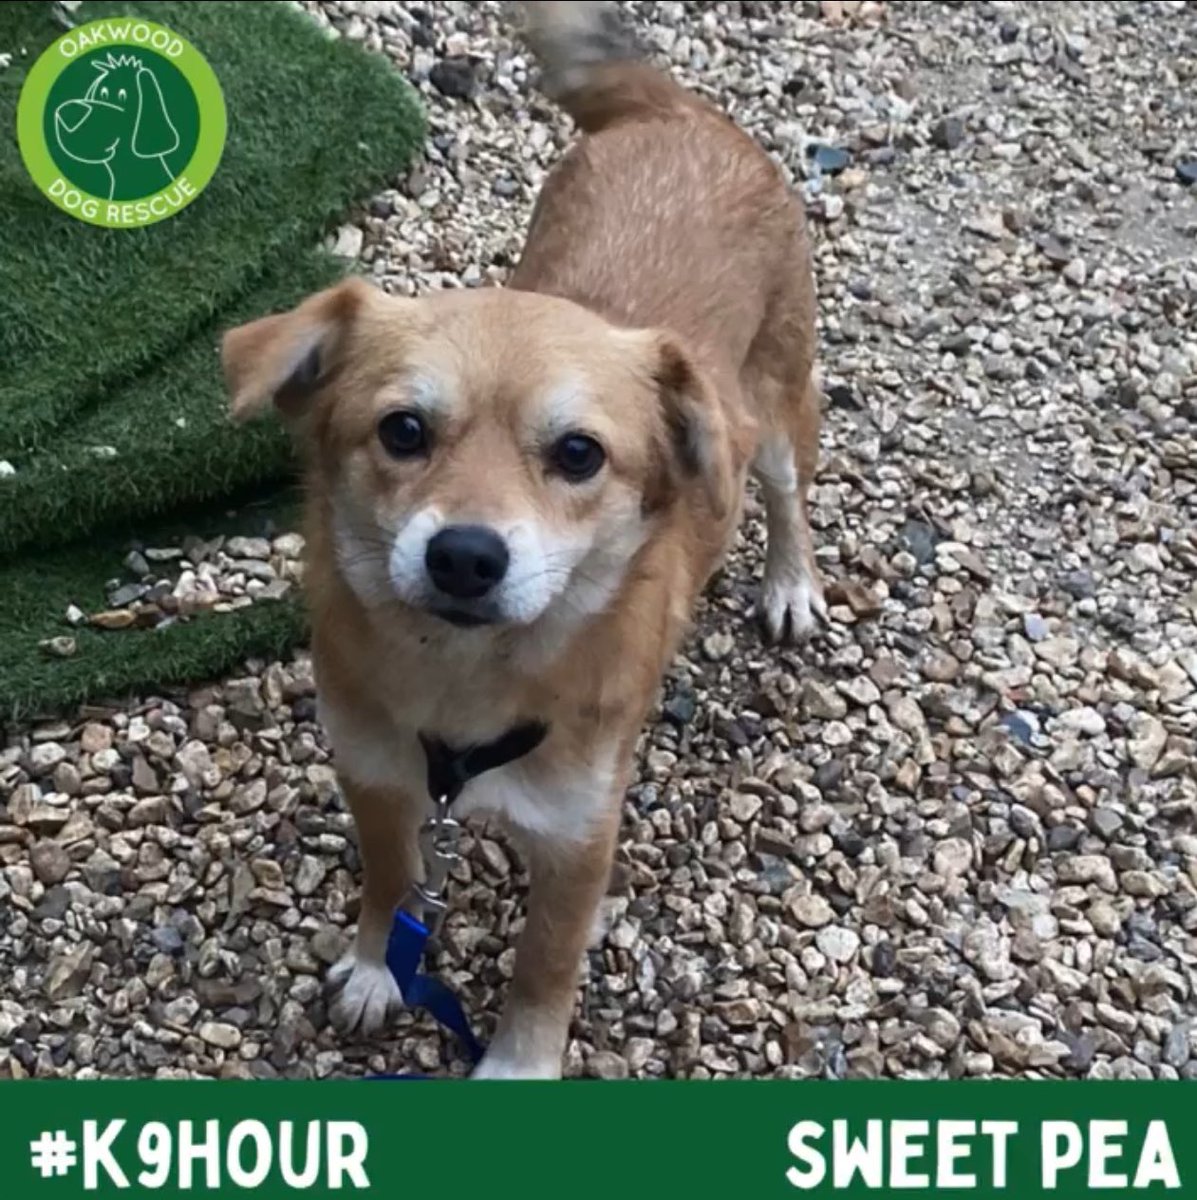 #k9hour super duper cutie patootie on the lookout for a fabulous forever home plz RT #Sweetpea #TeamZay @OakwoodRescue